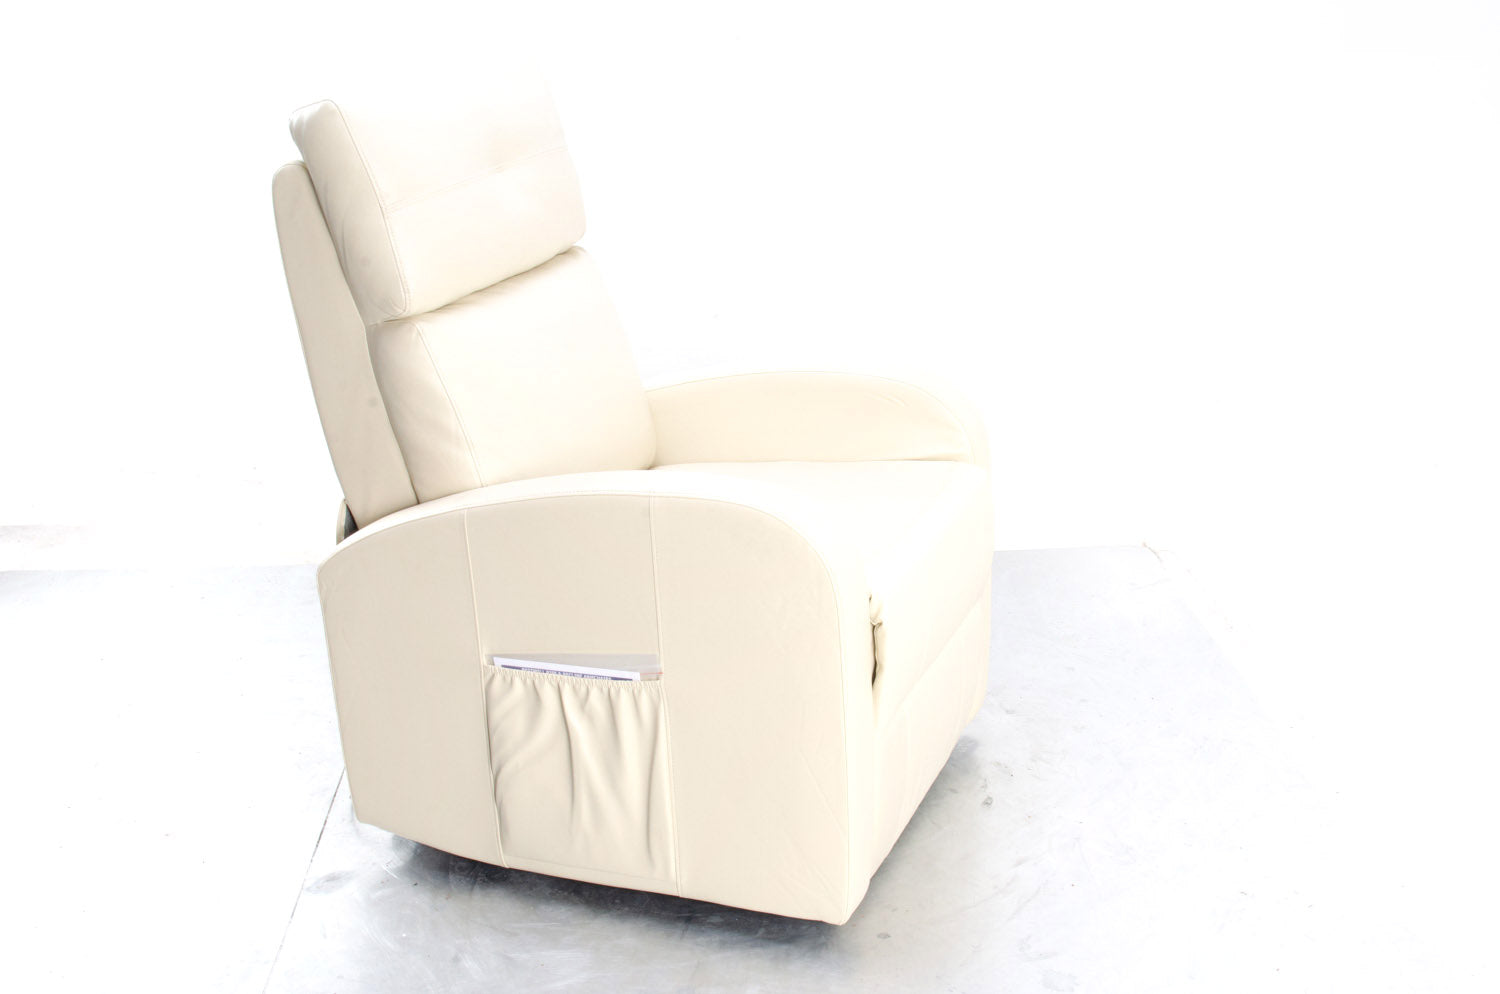 New Restwell Dual Motor Rise & Recline Chair from Drive DeVilbiss in Cream